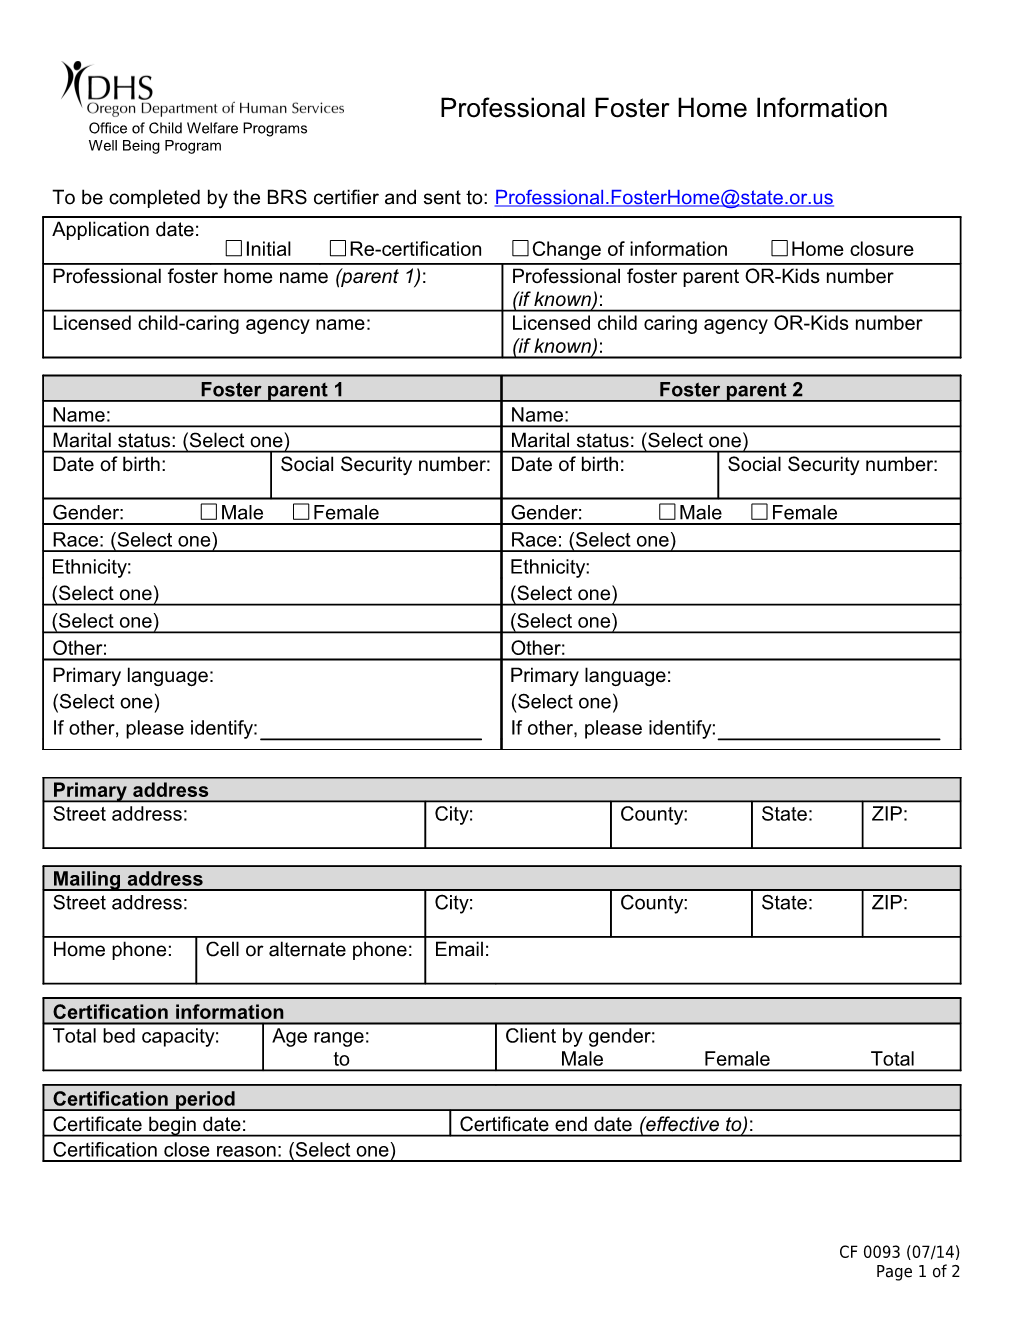 Professional Foster Home Information CF 0093 (3/13)